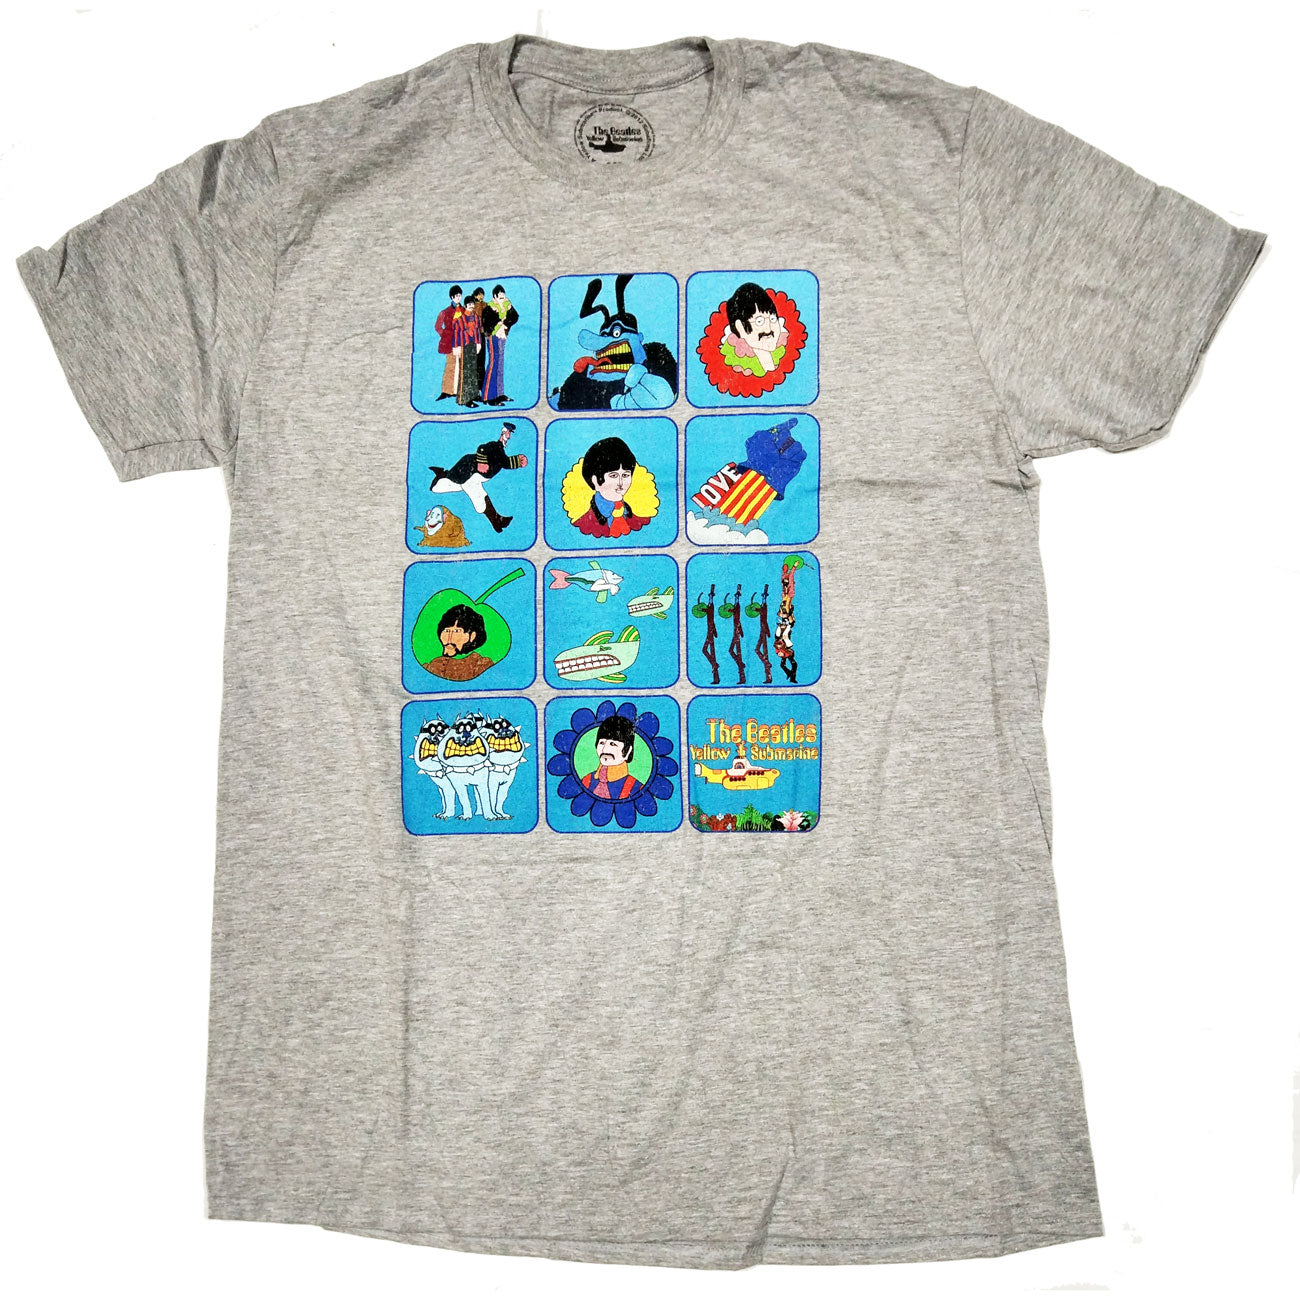 The Beatles T Shirt - Yellow Submarine Characters 100% Official